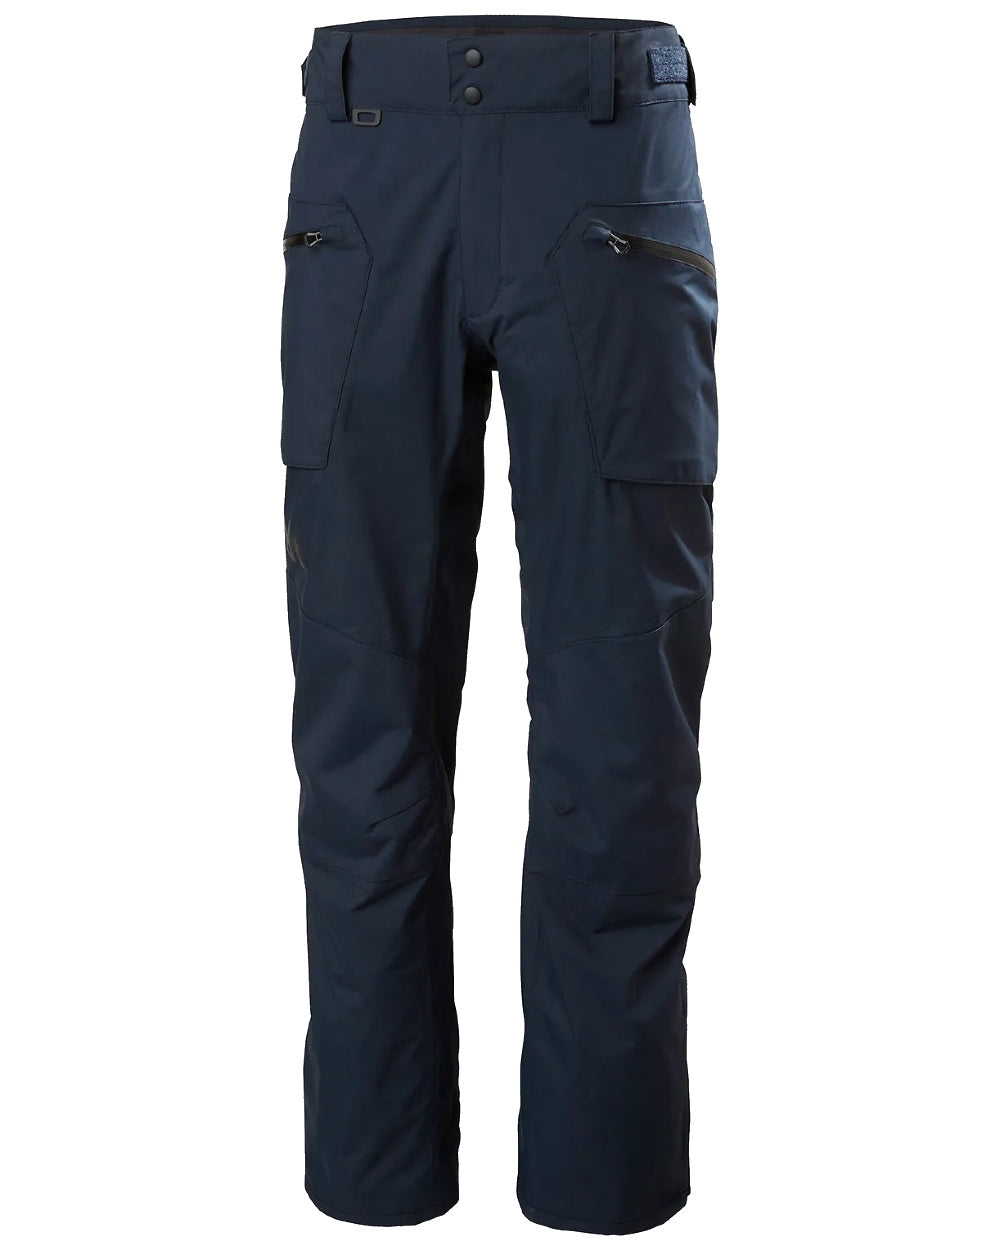 Navy coloured Helly Hansen Mens HP Foil Sailing Pants on white background 